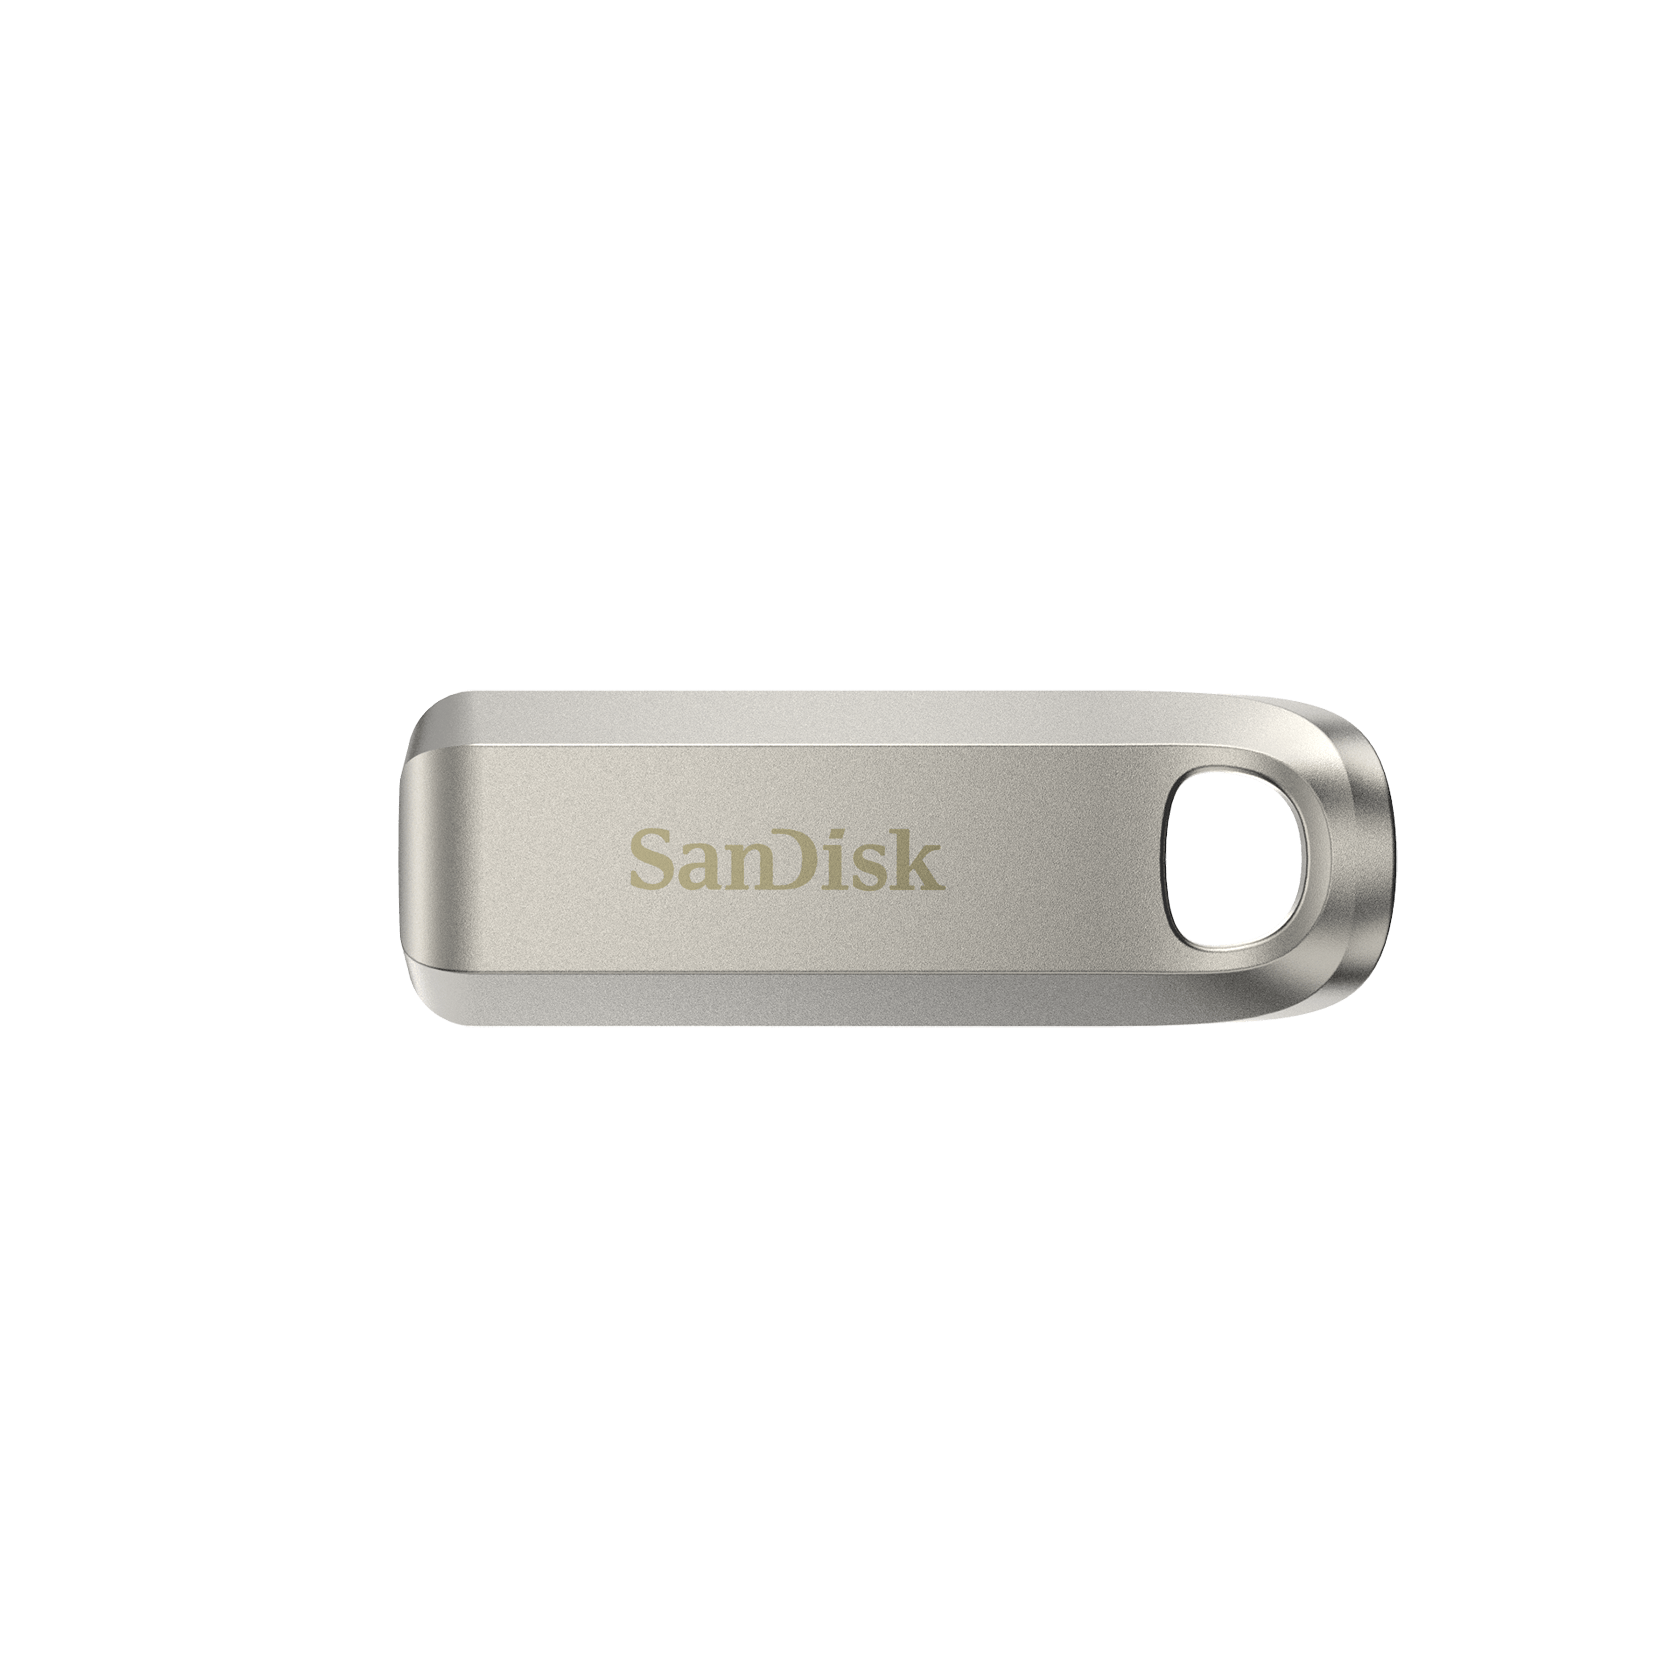 SanDisk Ultra Luxe USB Type-C Drive - 64GB - SDCZ75-064G-G46